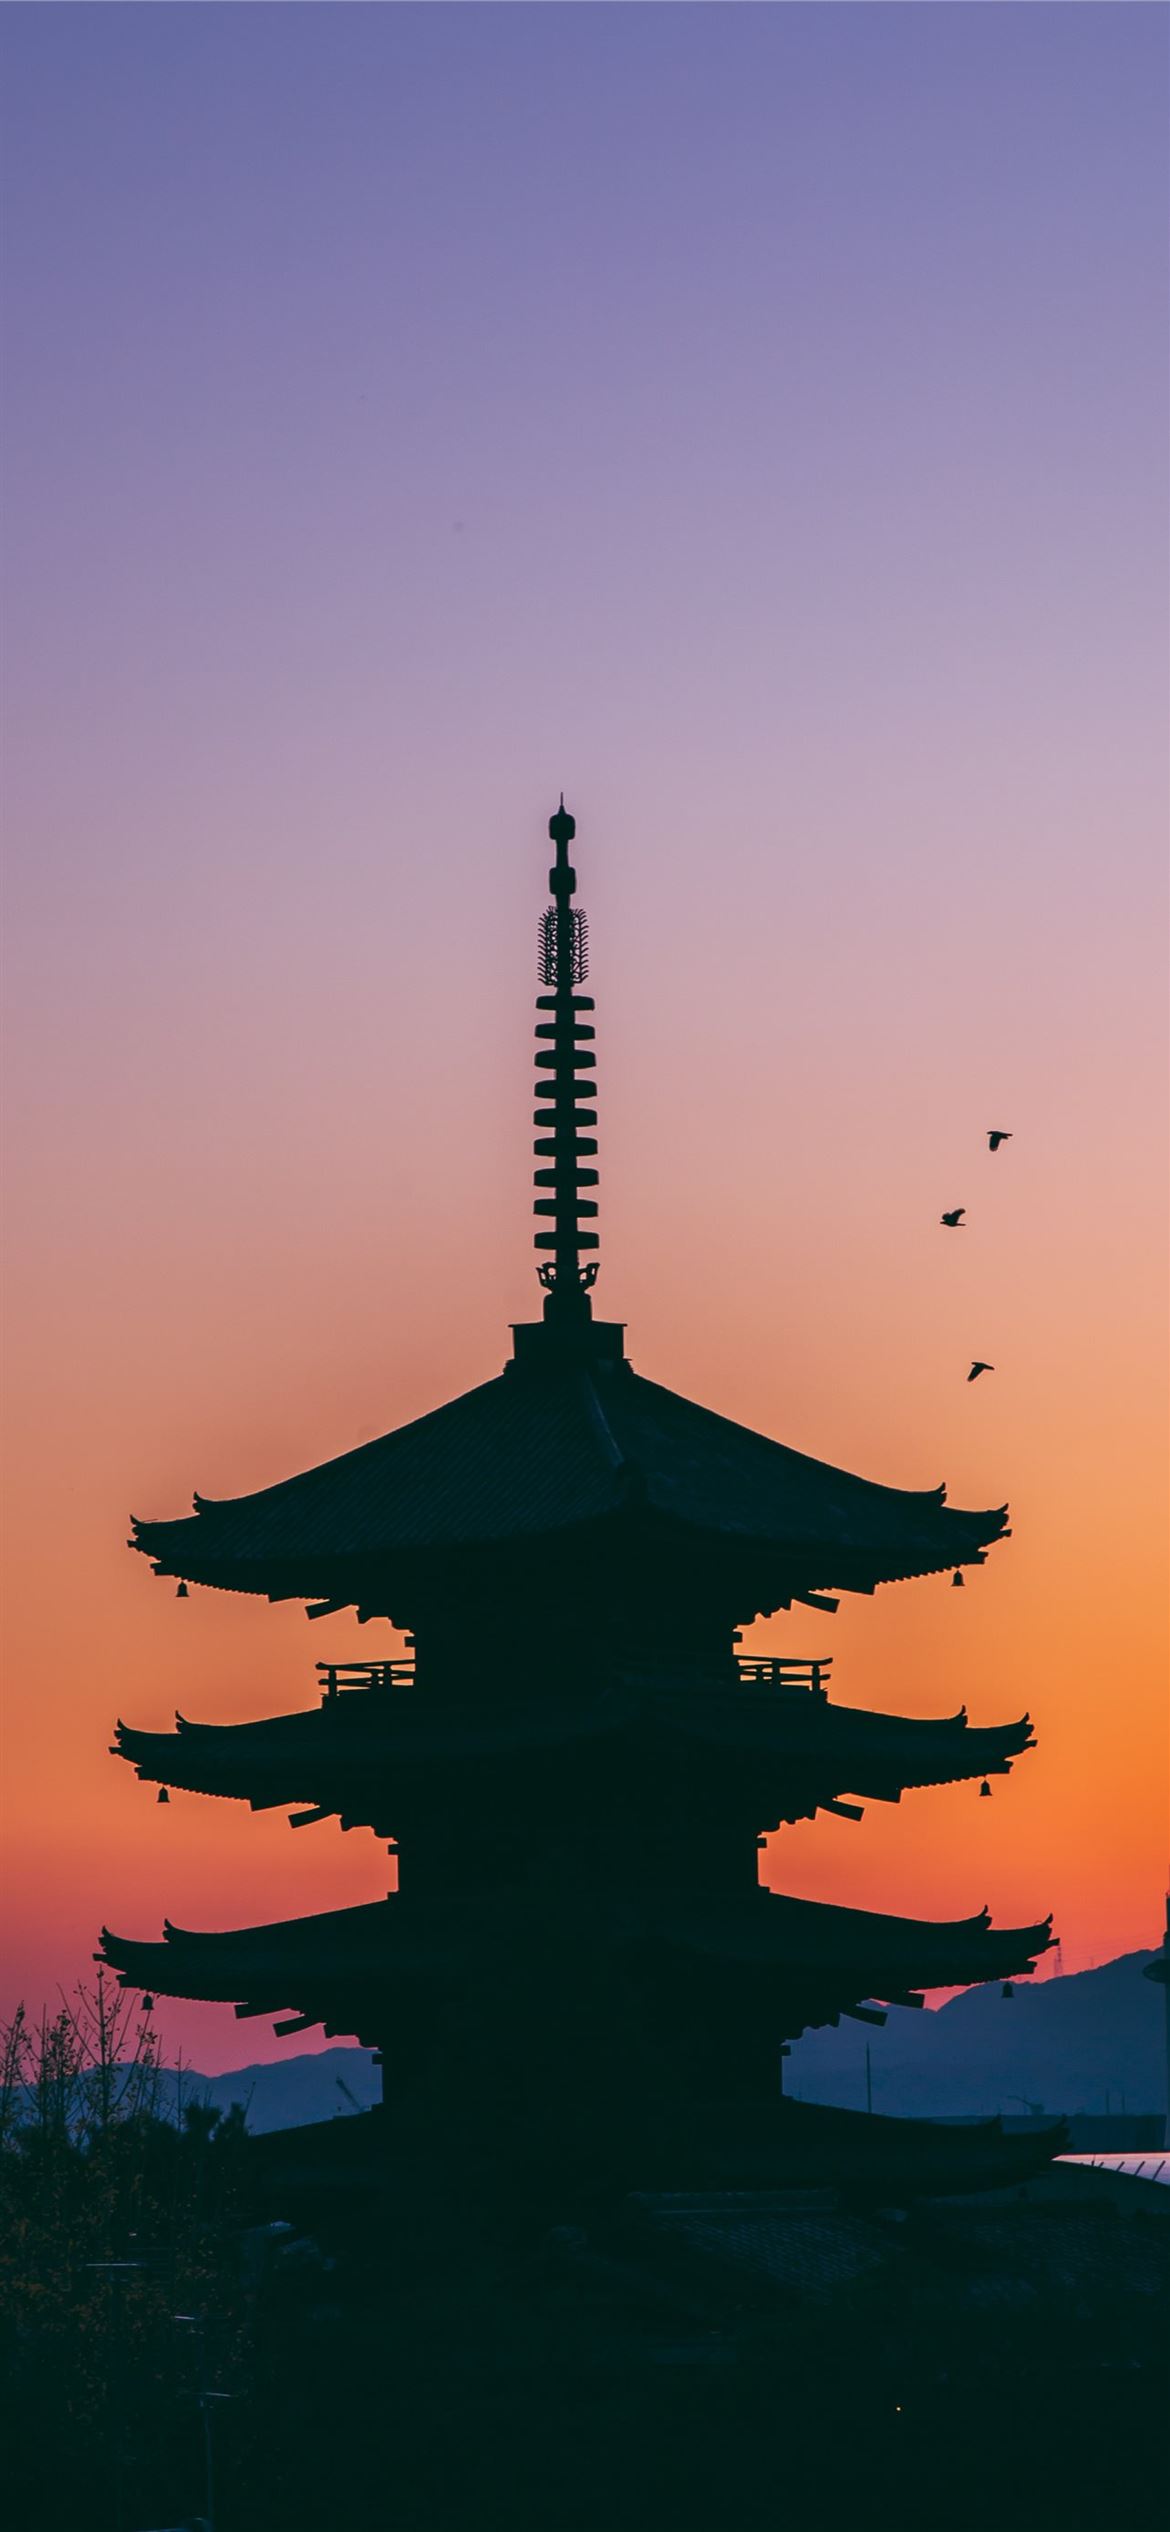 Pagoda temple surrounded by trees photo  Free Wallpapers Image on Unsplash